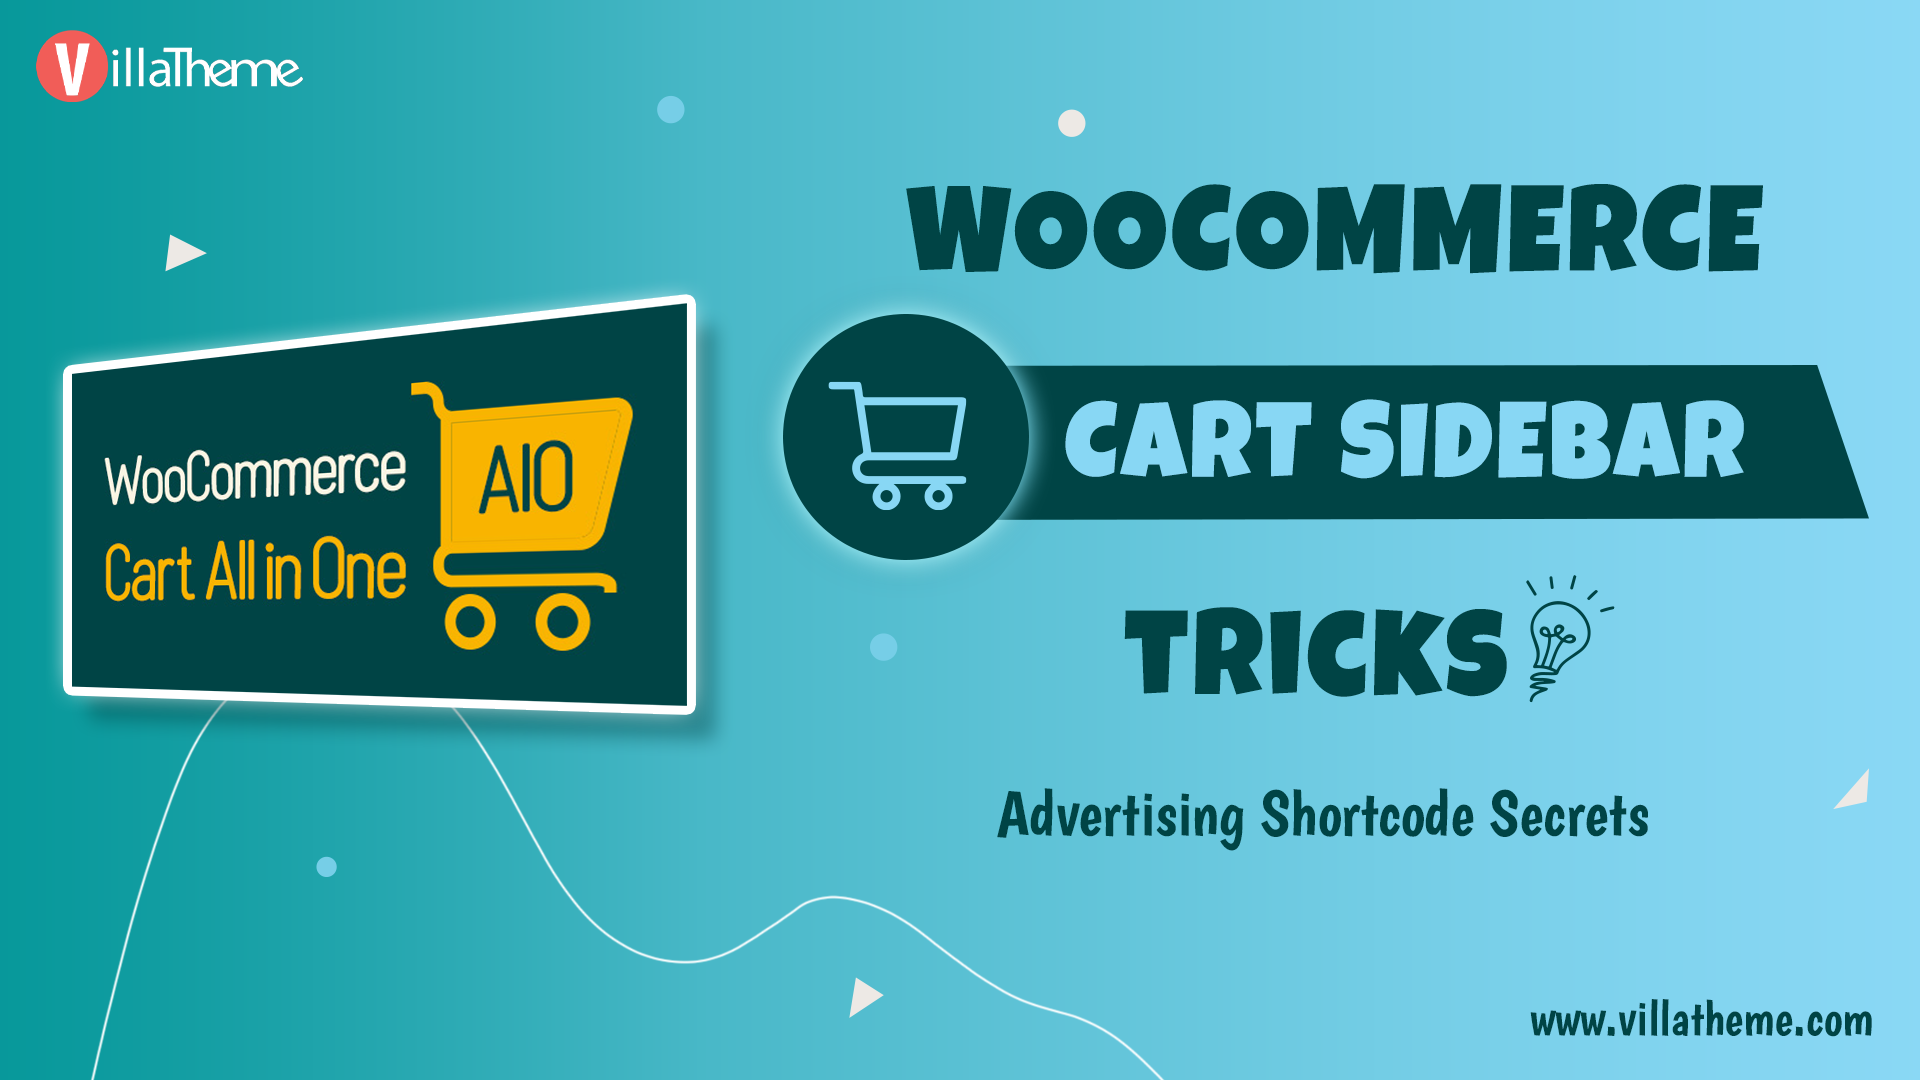 Boost sales with Advertising shortcodes